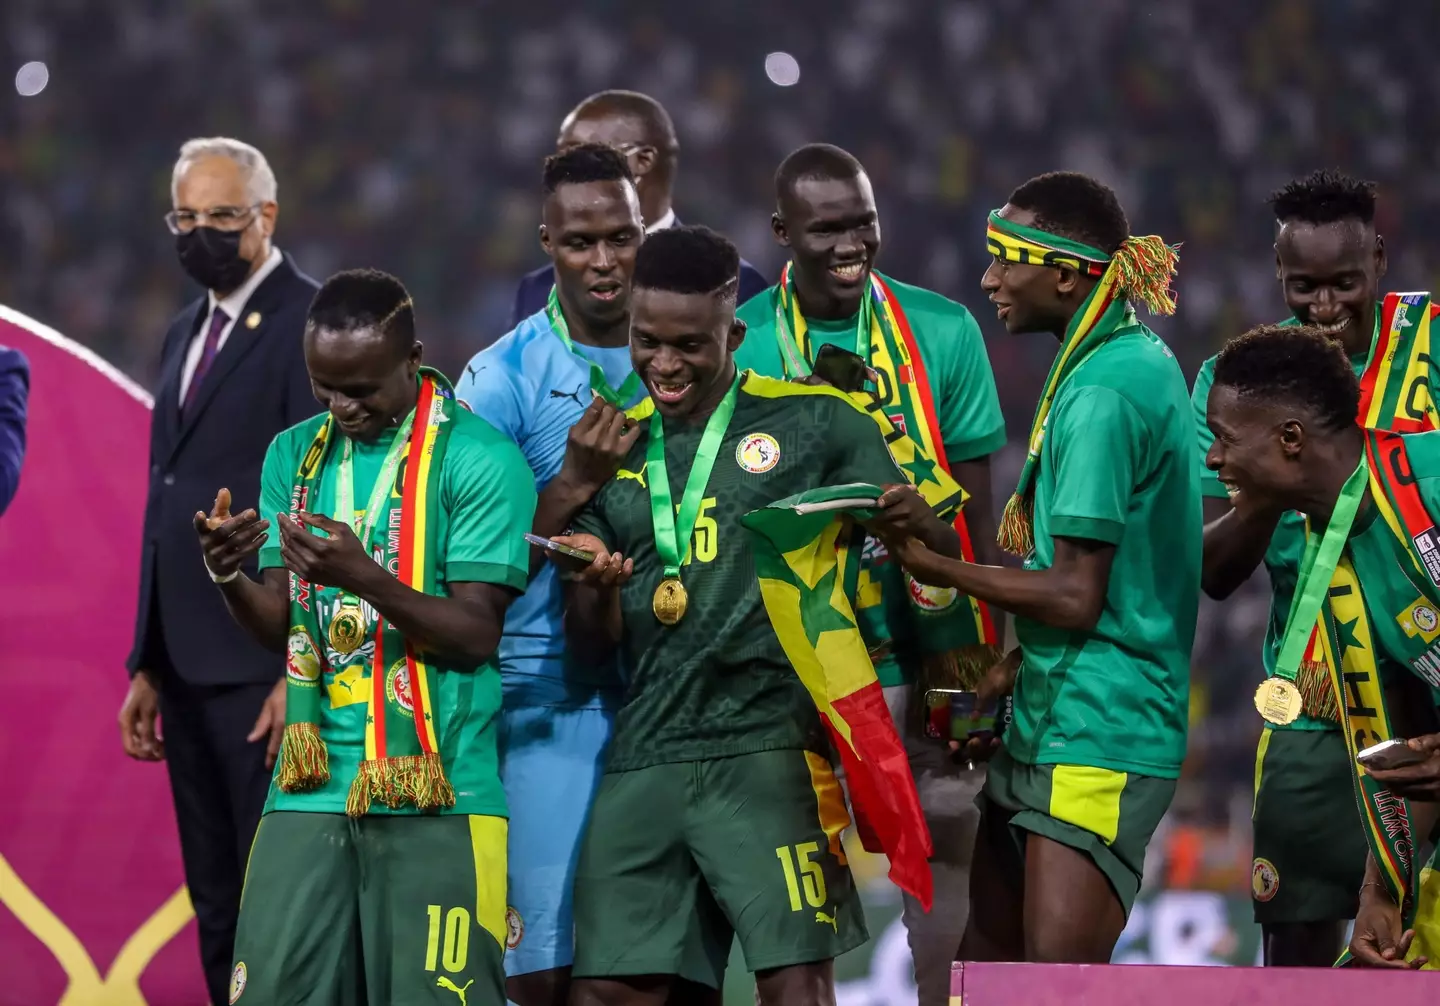 Edouard Mendy and Kalidou Koulibaly celebrating the Africa Cup of Nations triumph with Senegal. (Alamy)